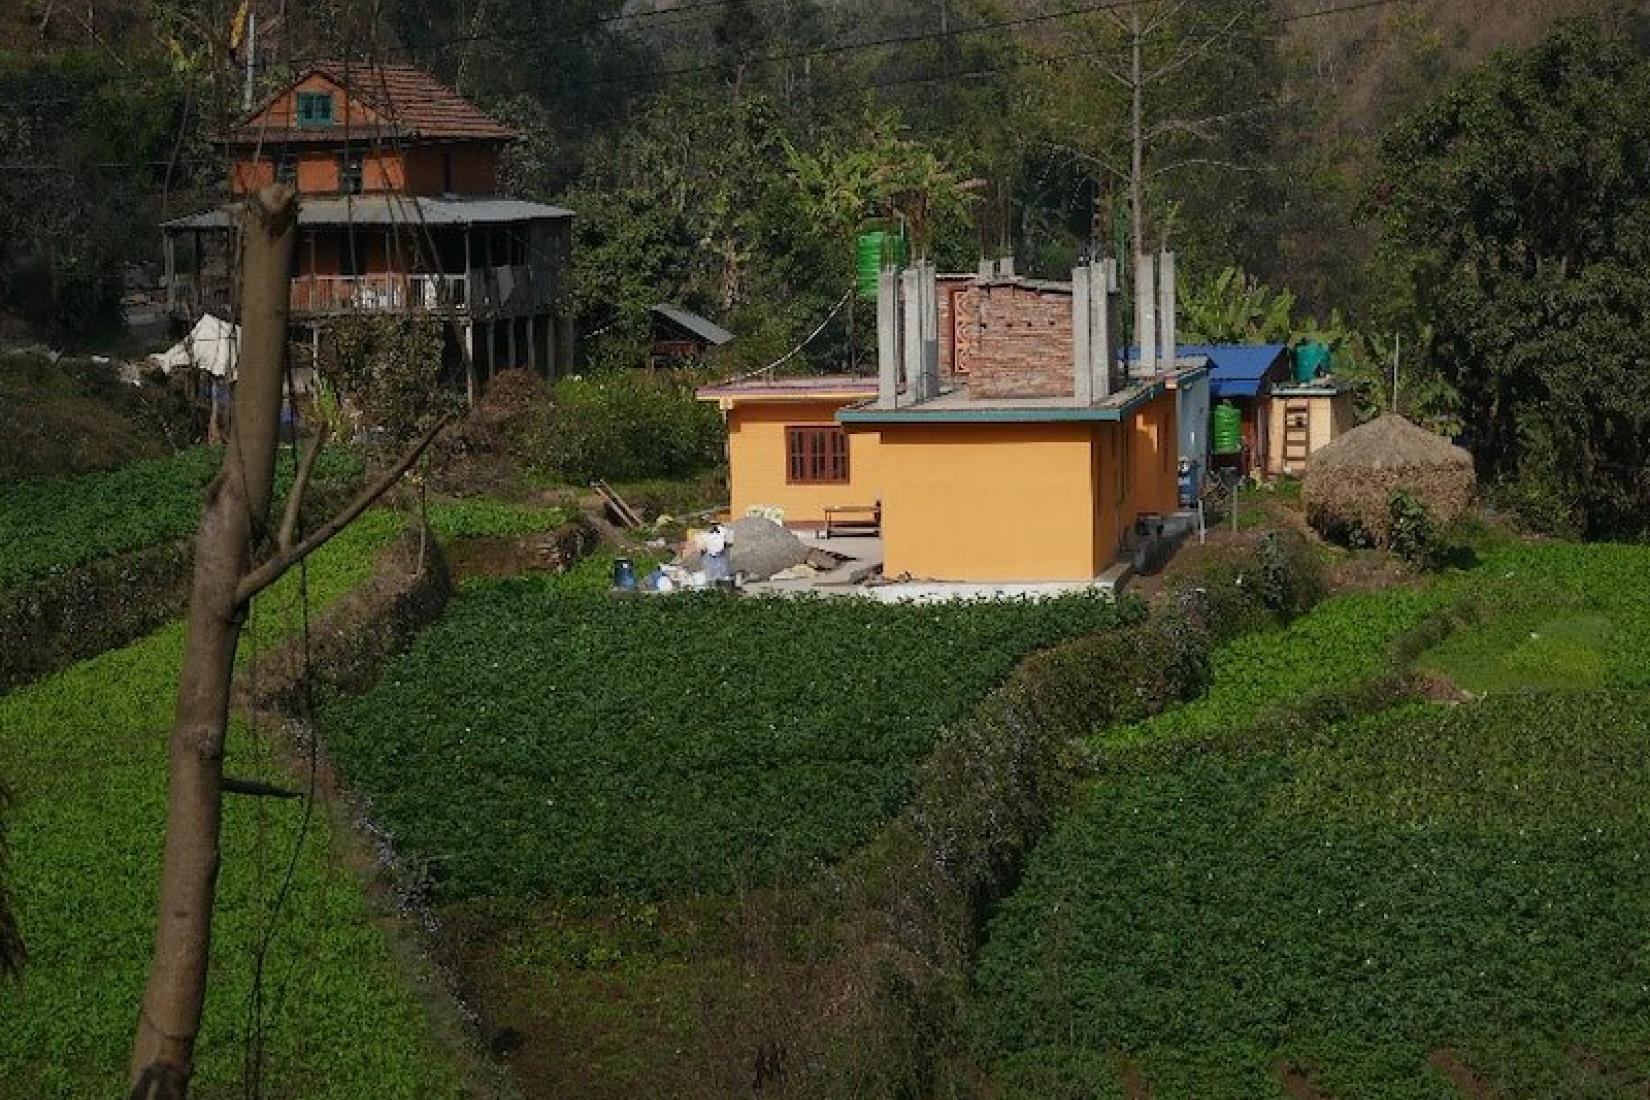 The 2015 earthquake severely damaged many towns, villages and houses in the Middle Hills of Nepal, particularly along the ridge lines. Rebuilding is a slow process. Crops on the arable terraced land include wheat, mustard and millet, and along the river flats (right pic) cabbage, potato, cauliflower and fruit trees.